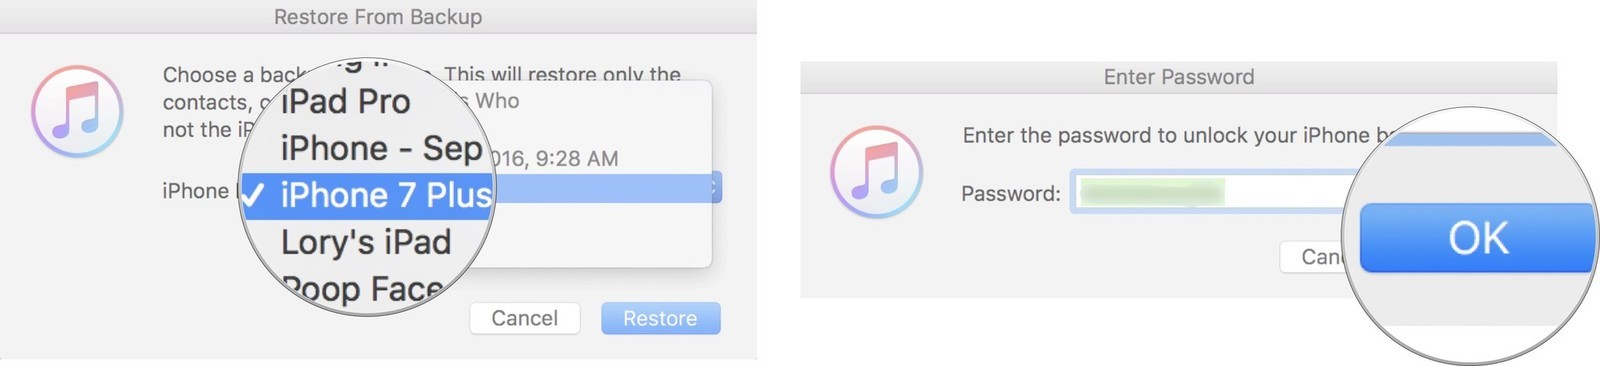 enter password to restore iPhone with iTunes